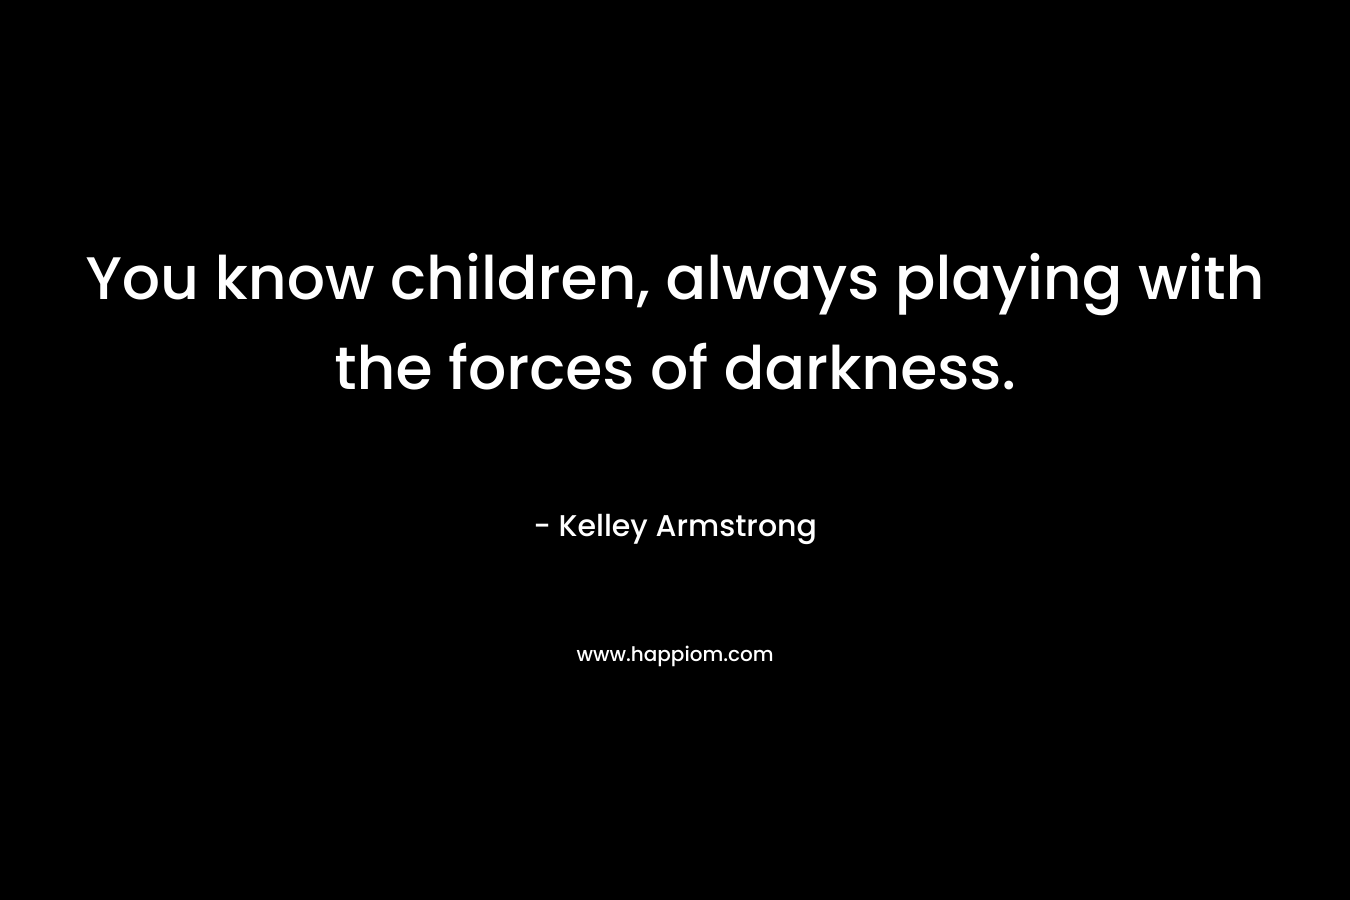 You know children, always playing with the forces of darkness.